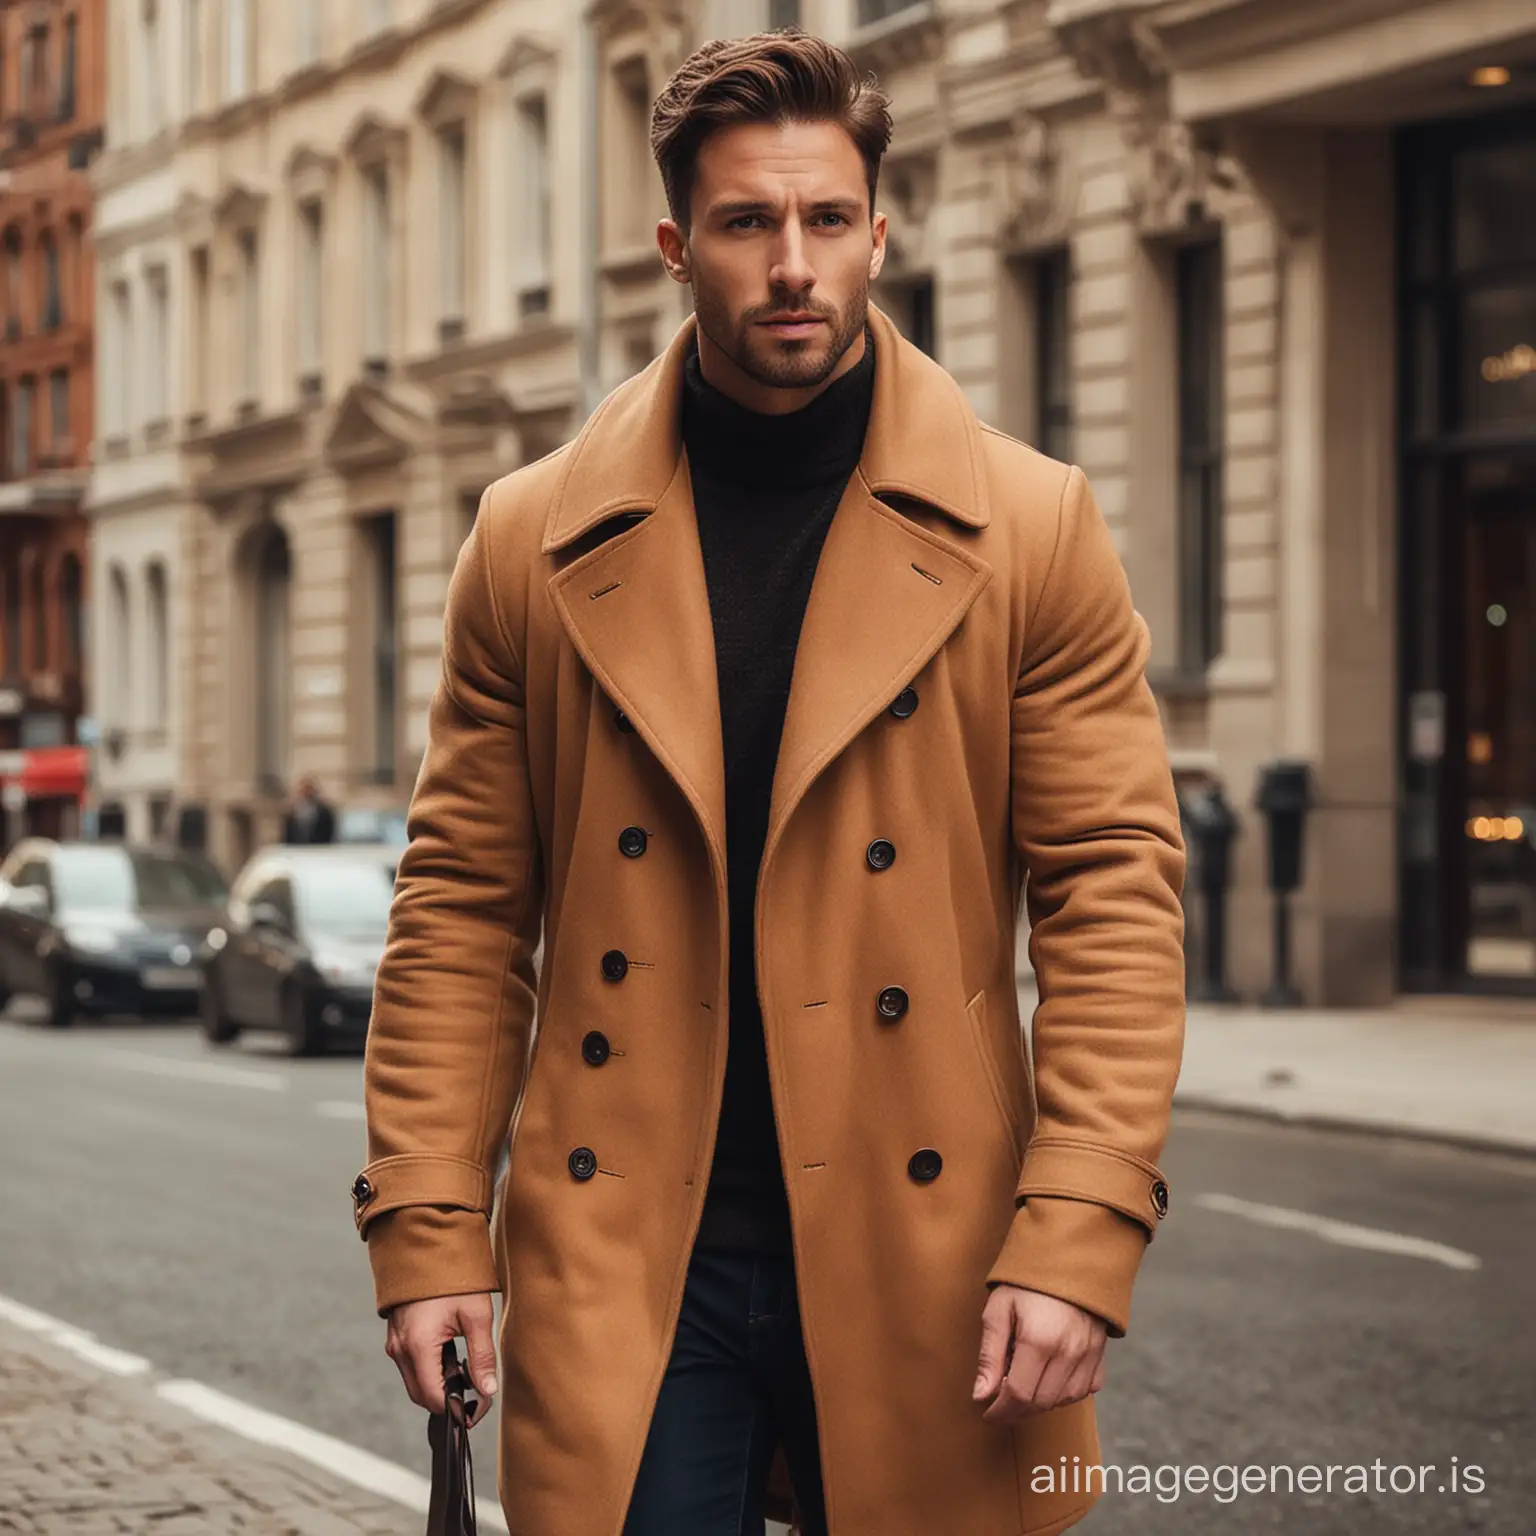 Stylish-Man-in-a-Brown-Coat